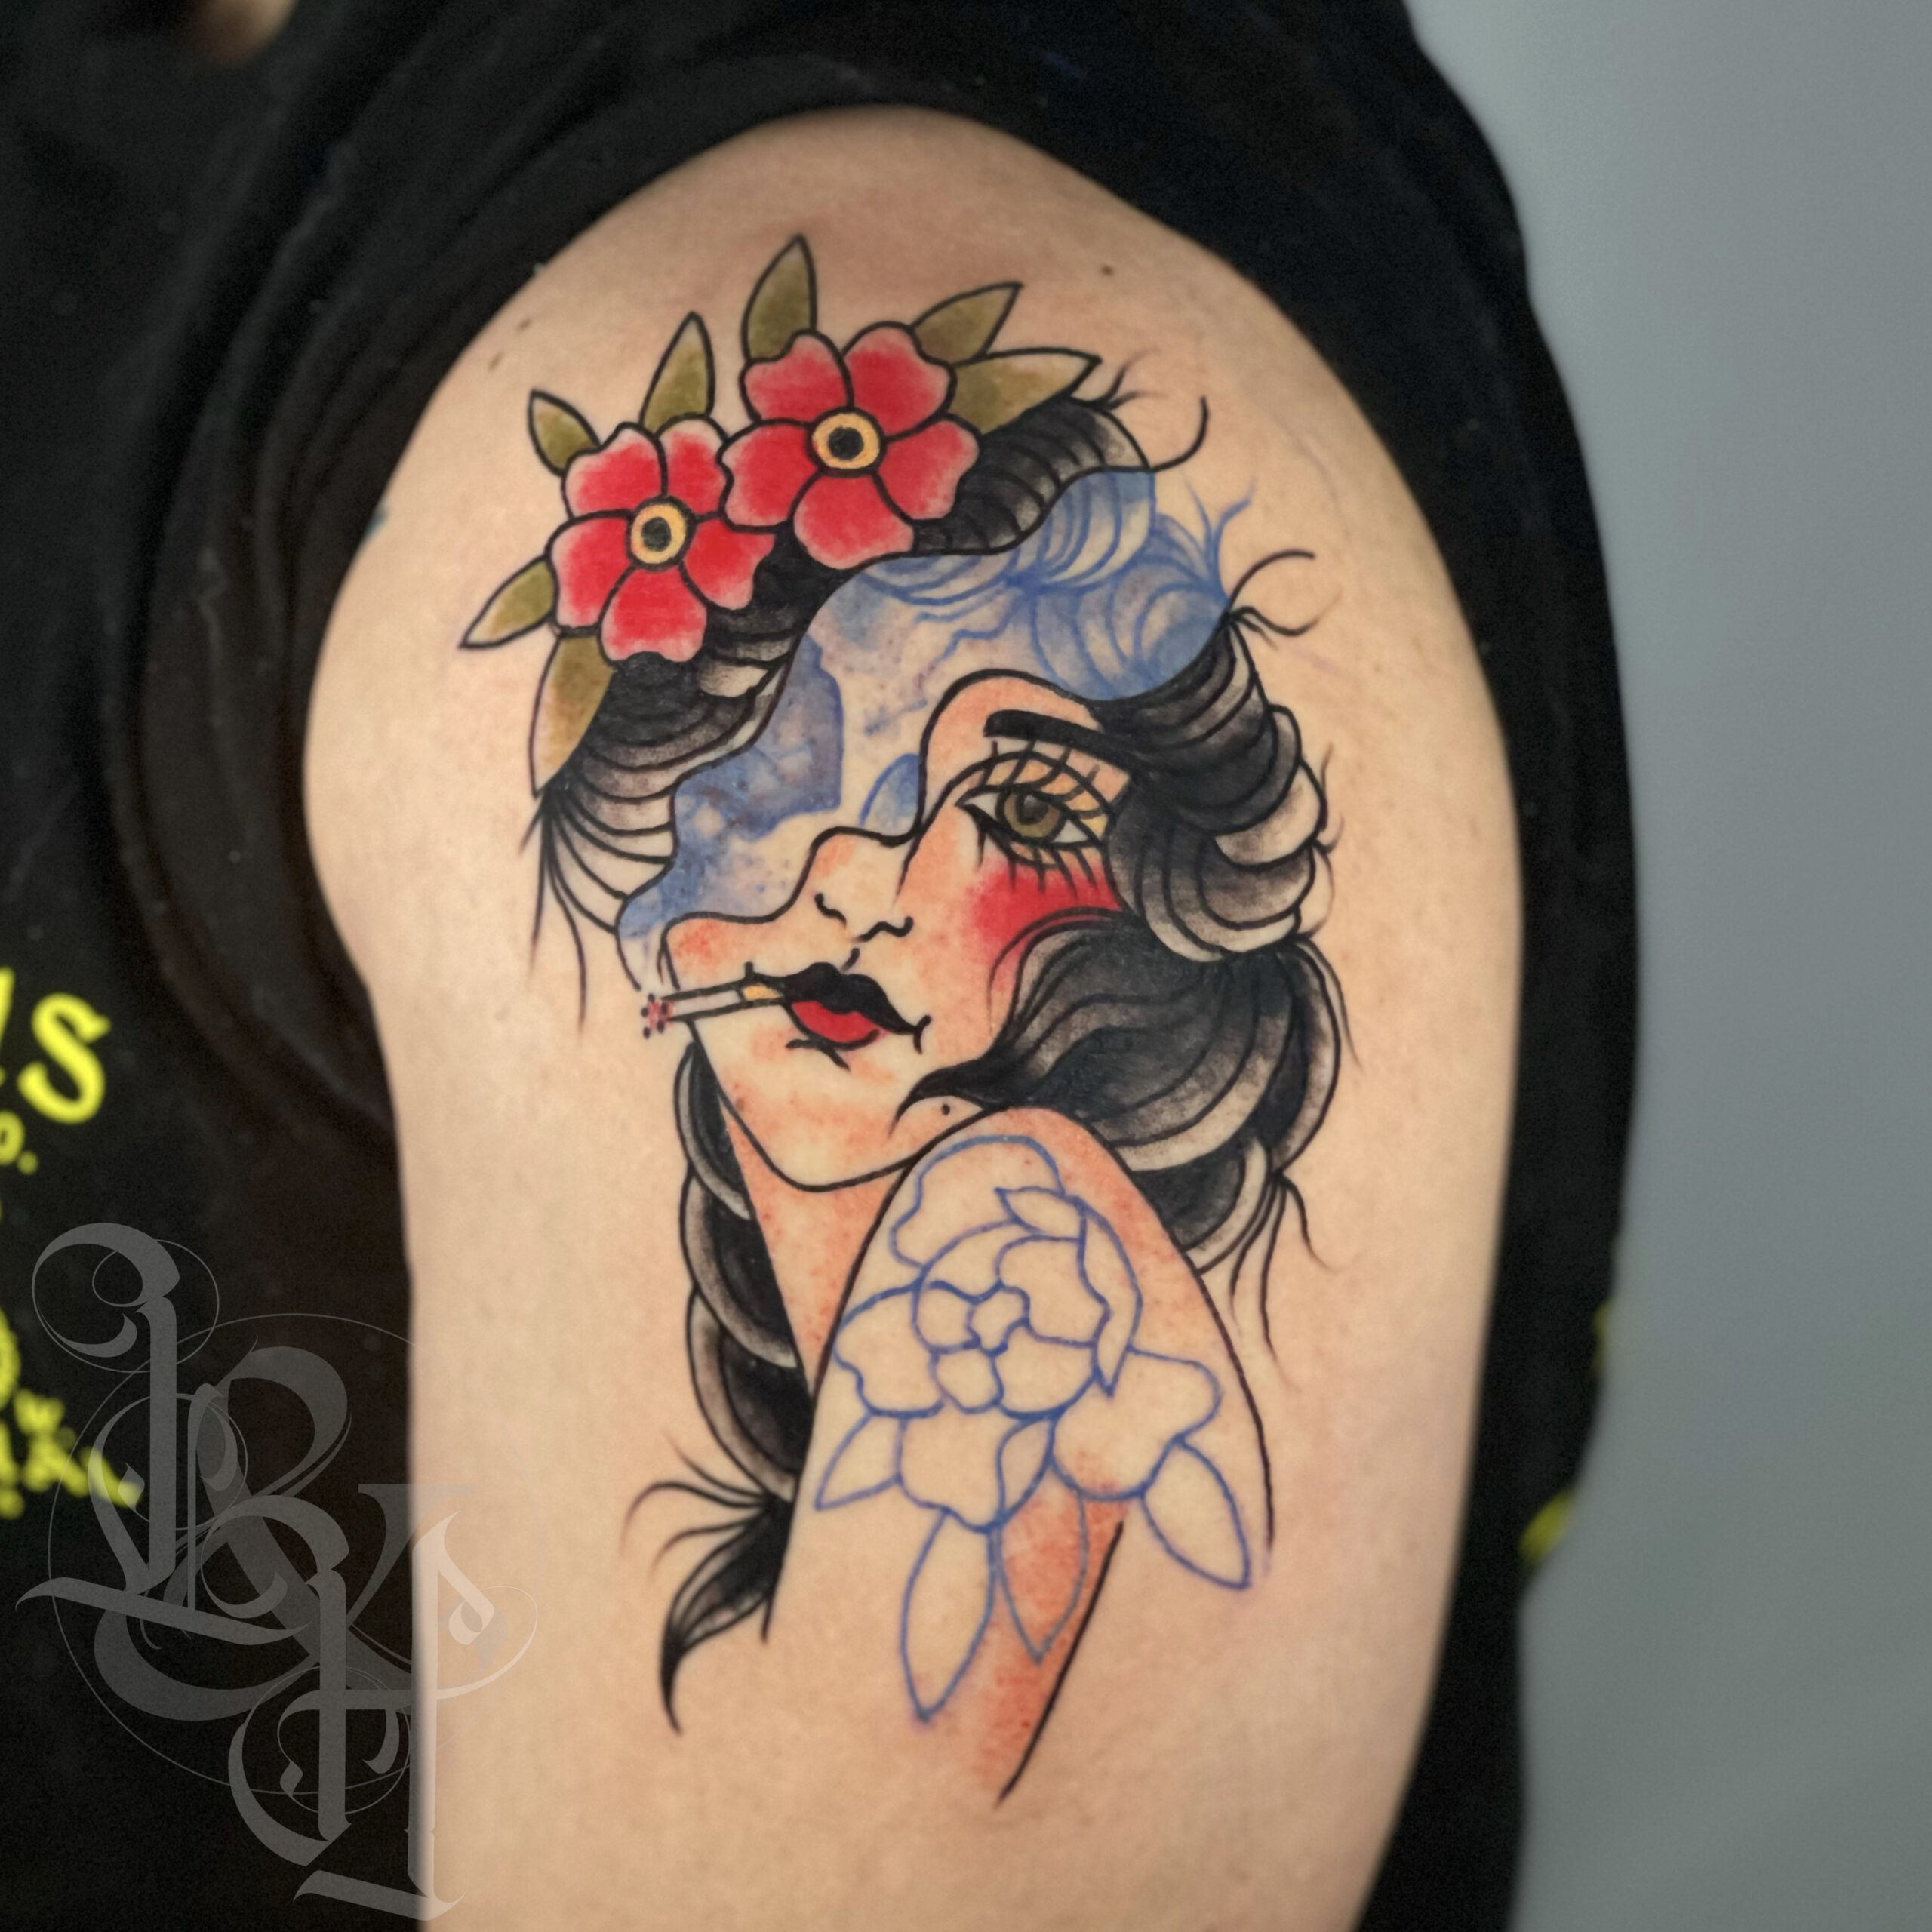 Lucky Cat Tattoo Studio  Traditional lady  Done by Tattoos by Sarah  Hobbs  Facebook